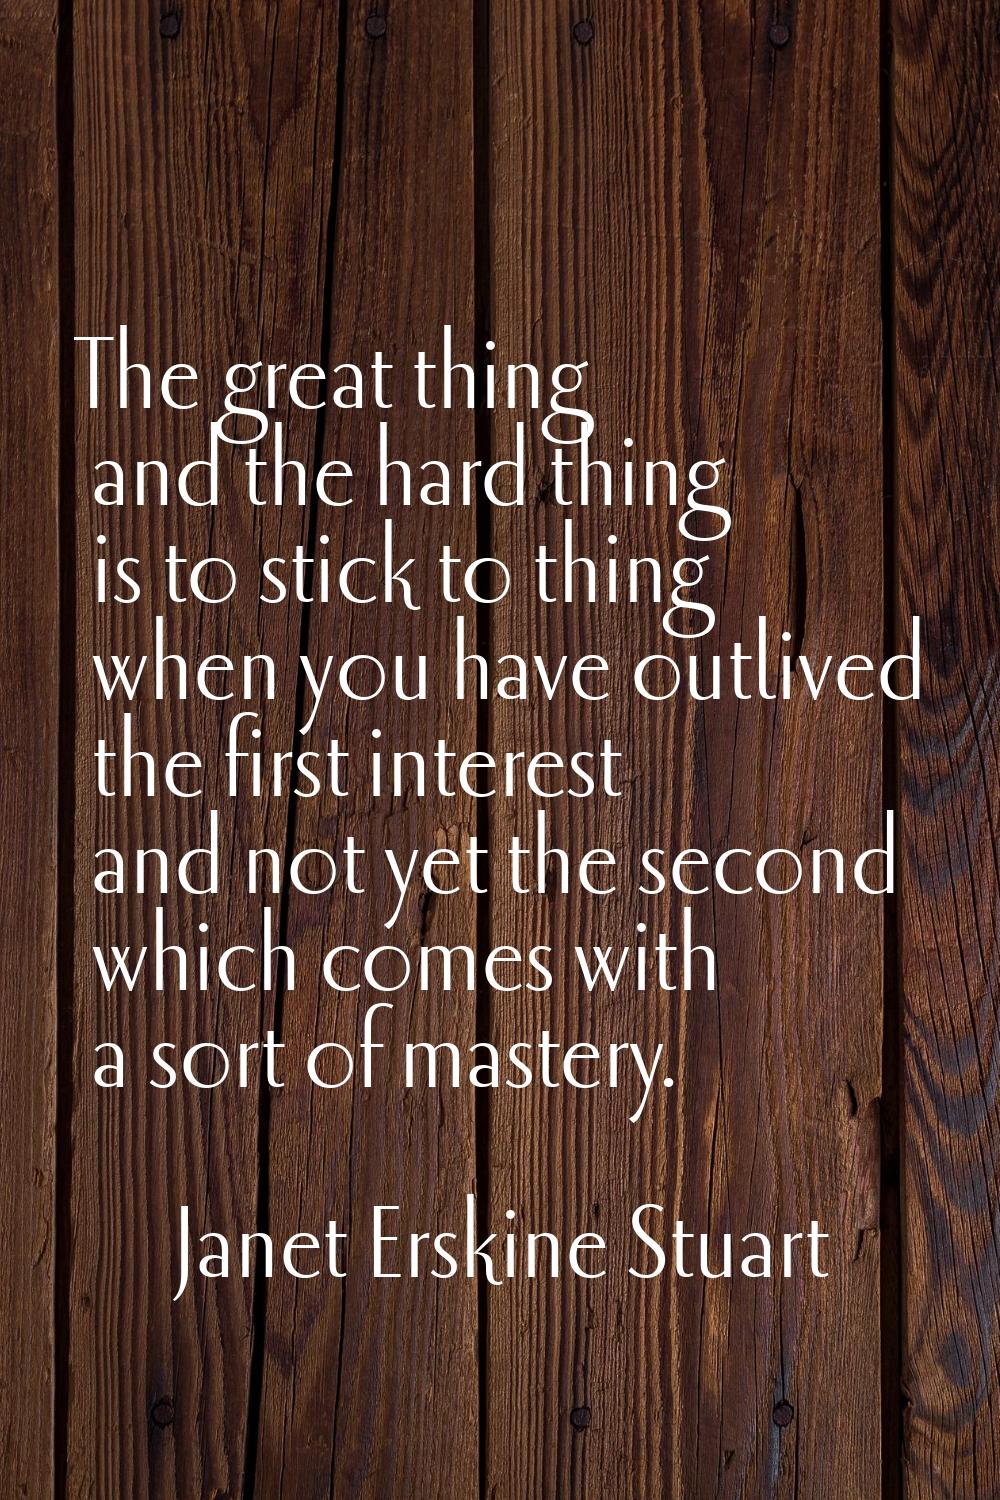 The great thing and the hard thing is to stick to thing when you have outlived the first interest a